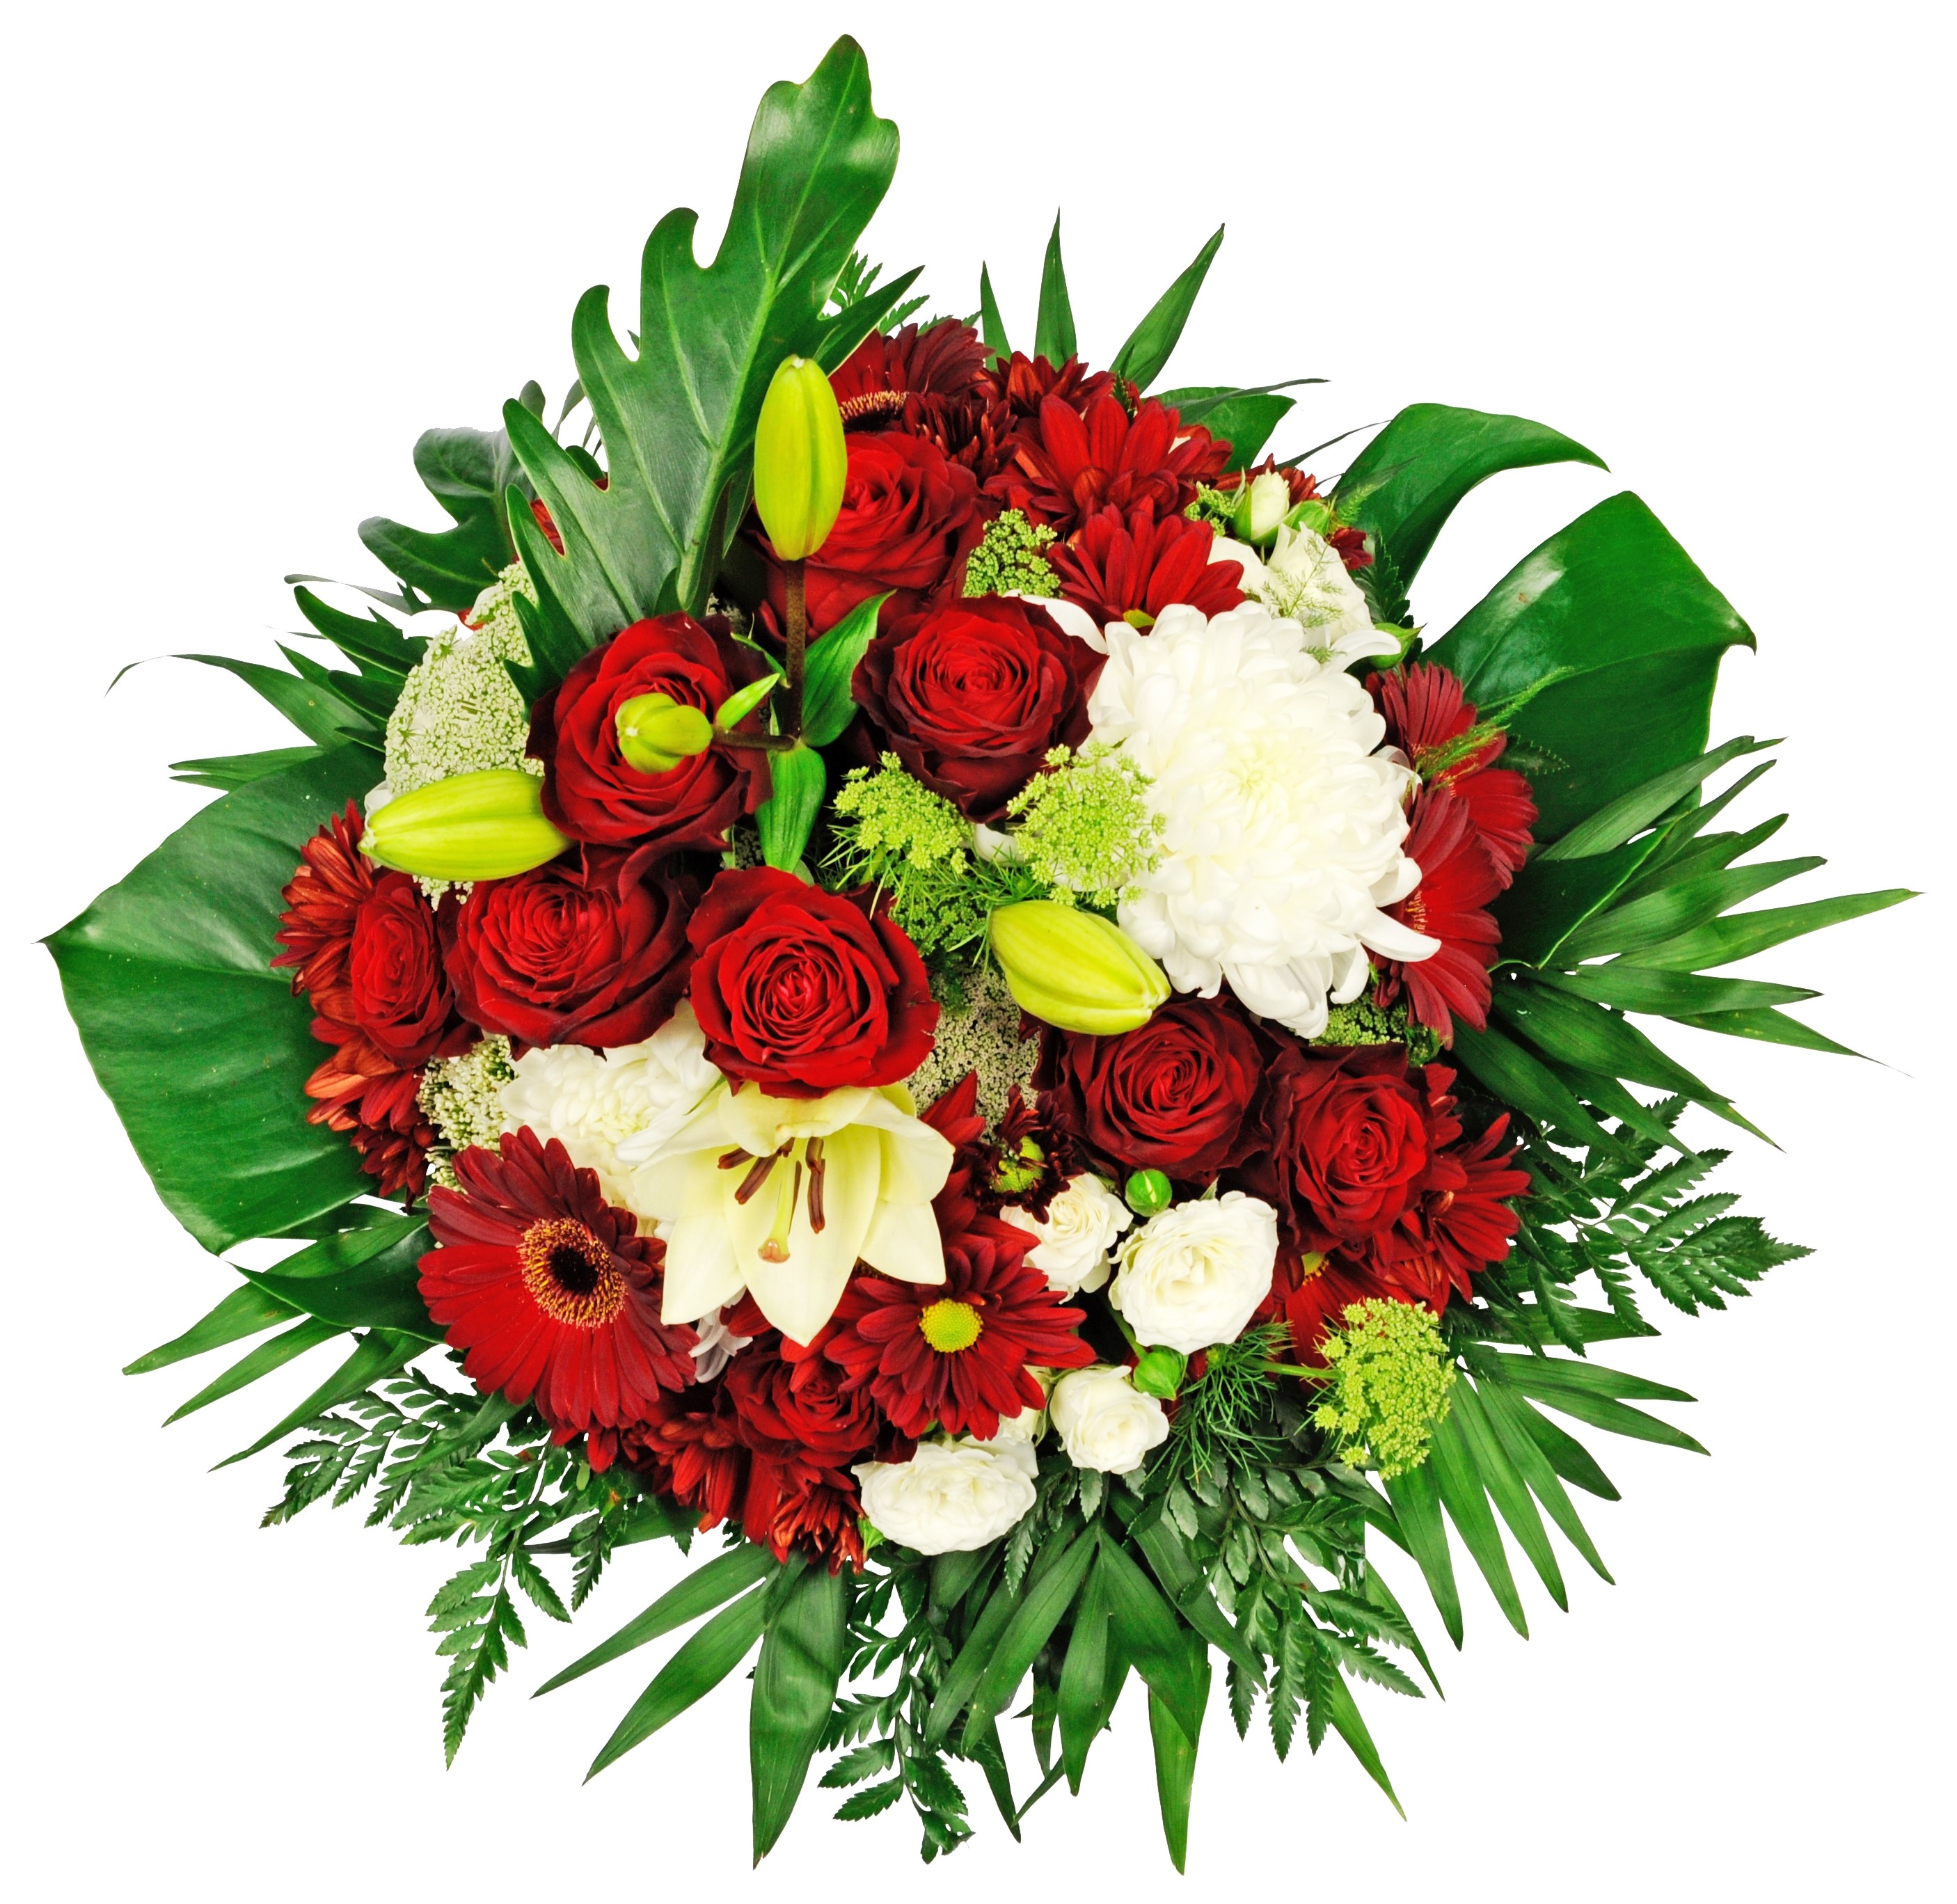 ROMANTIC MCF - only in strong red and white shades - roses/lilies/gerberas etc...